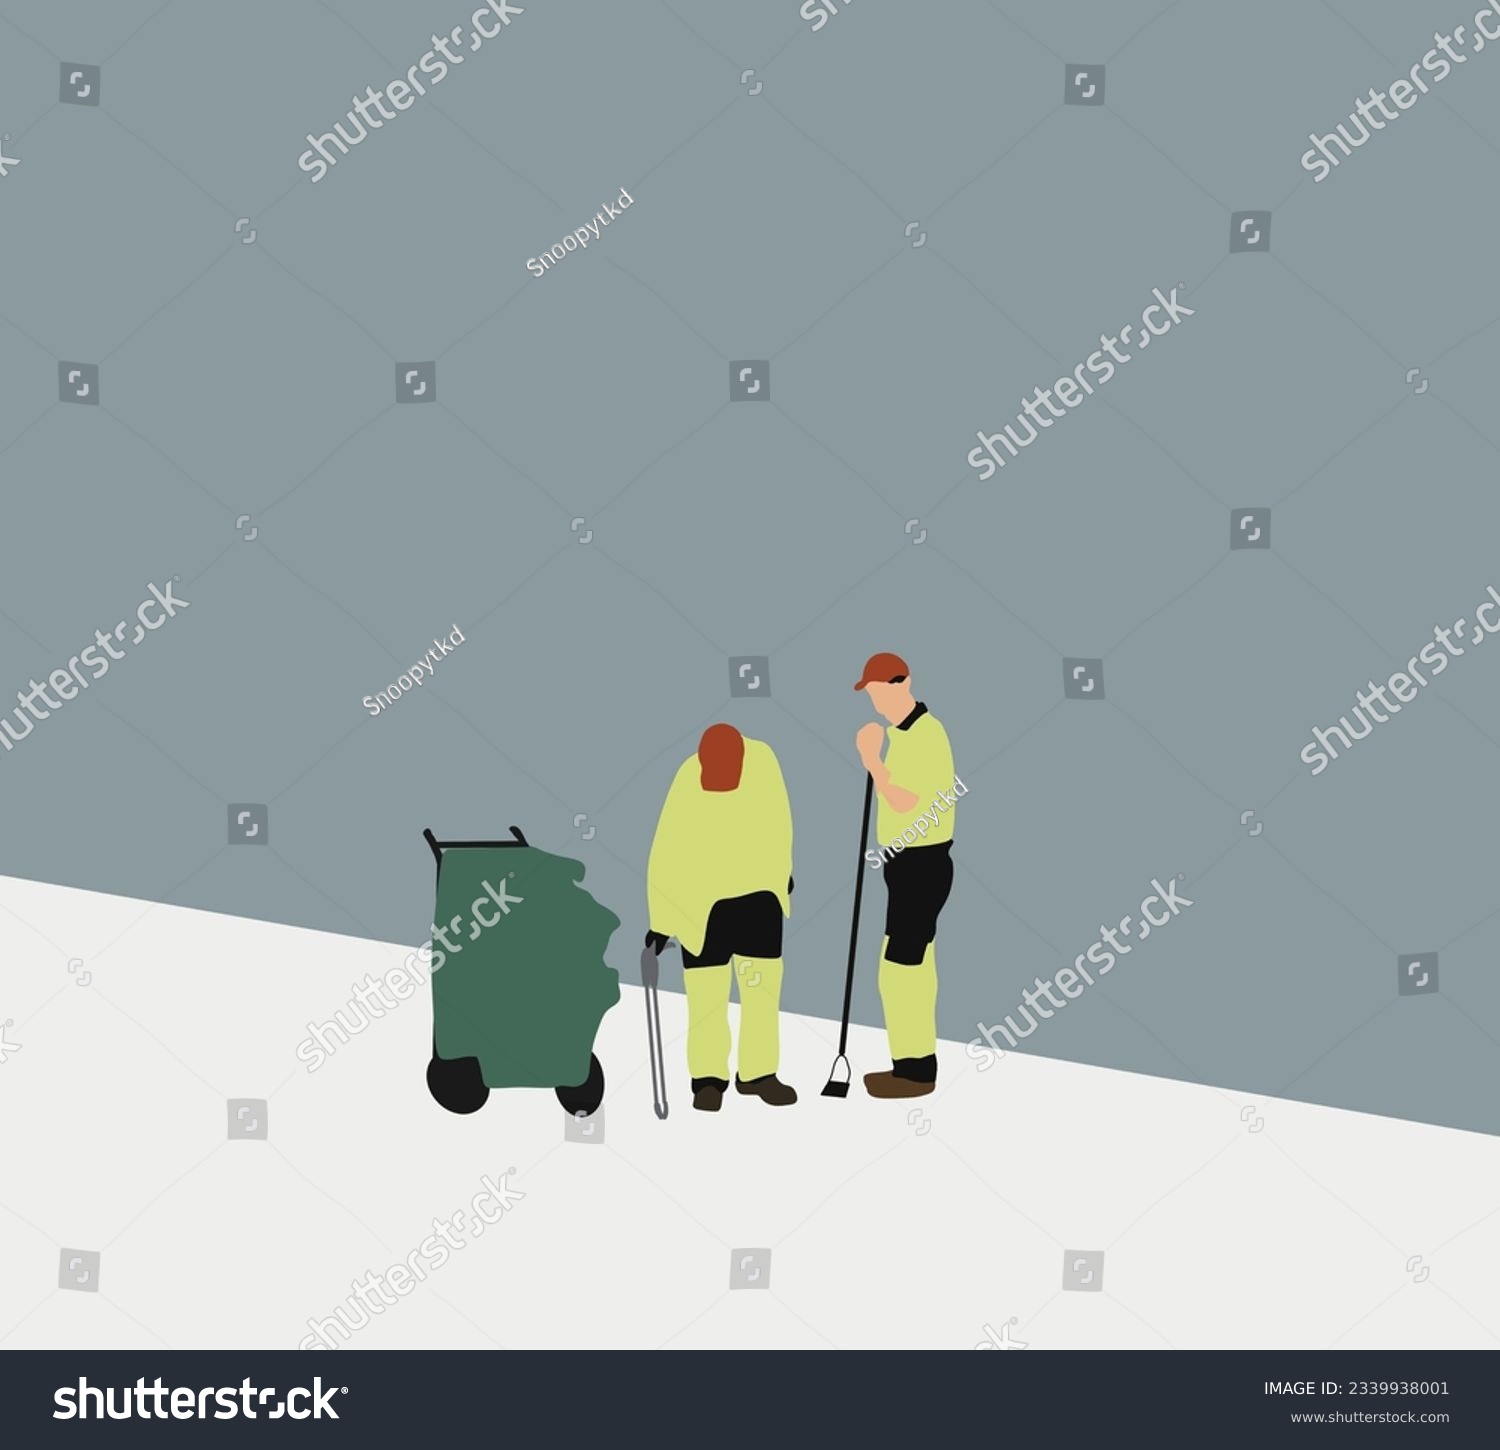 SVG of Garbage collection workers on street. Men who dispose of rubbish that works for public benefit. recycling garbage collector truck loading waste and trash bin svg